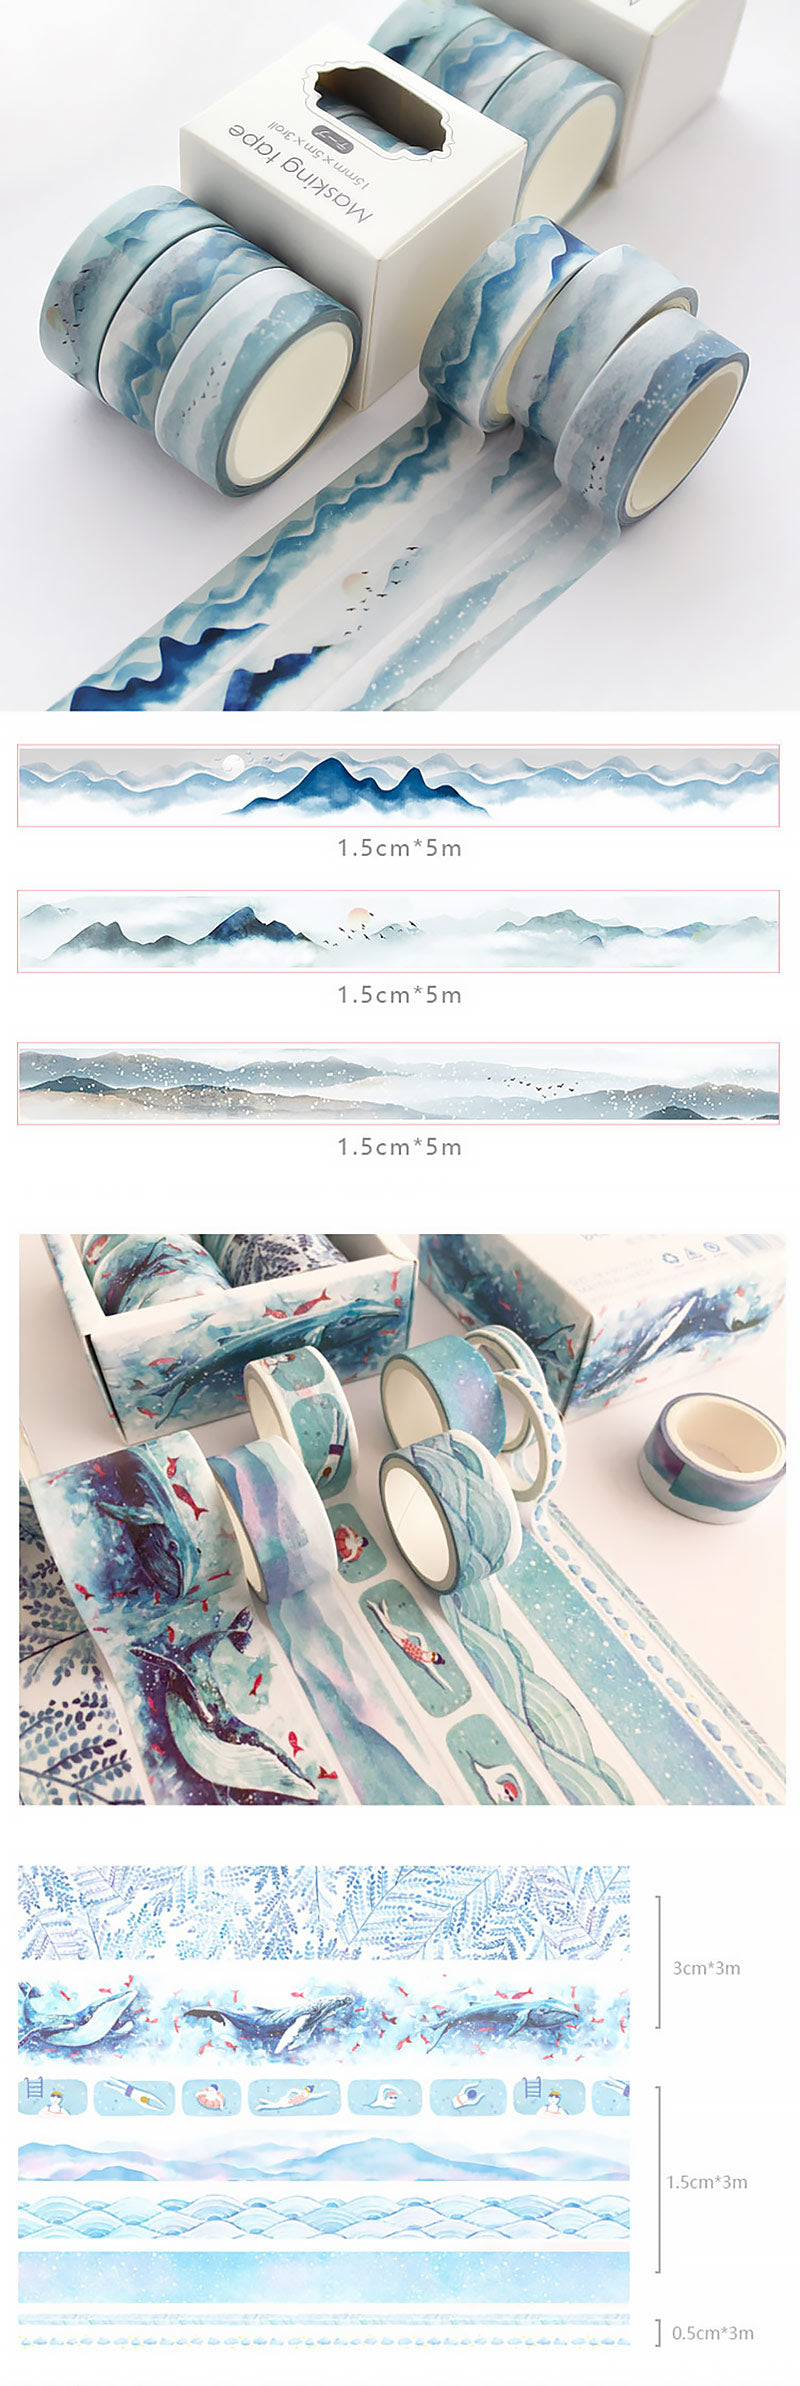 Pastel Watercolor Washi Tape Box Set - Overview